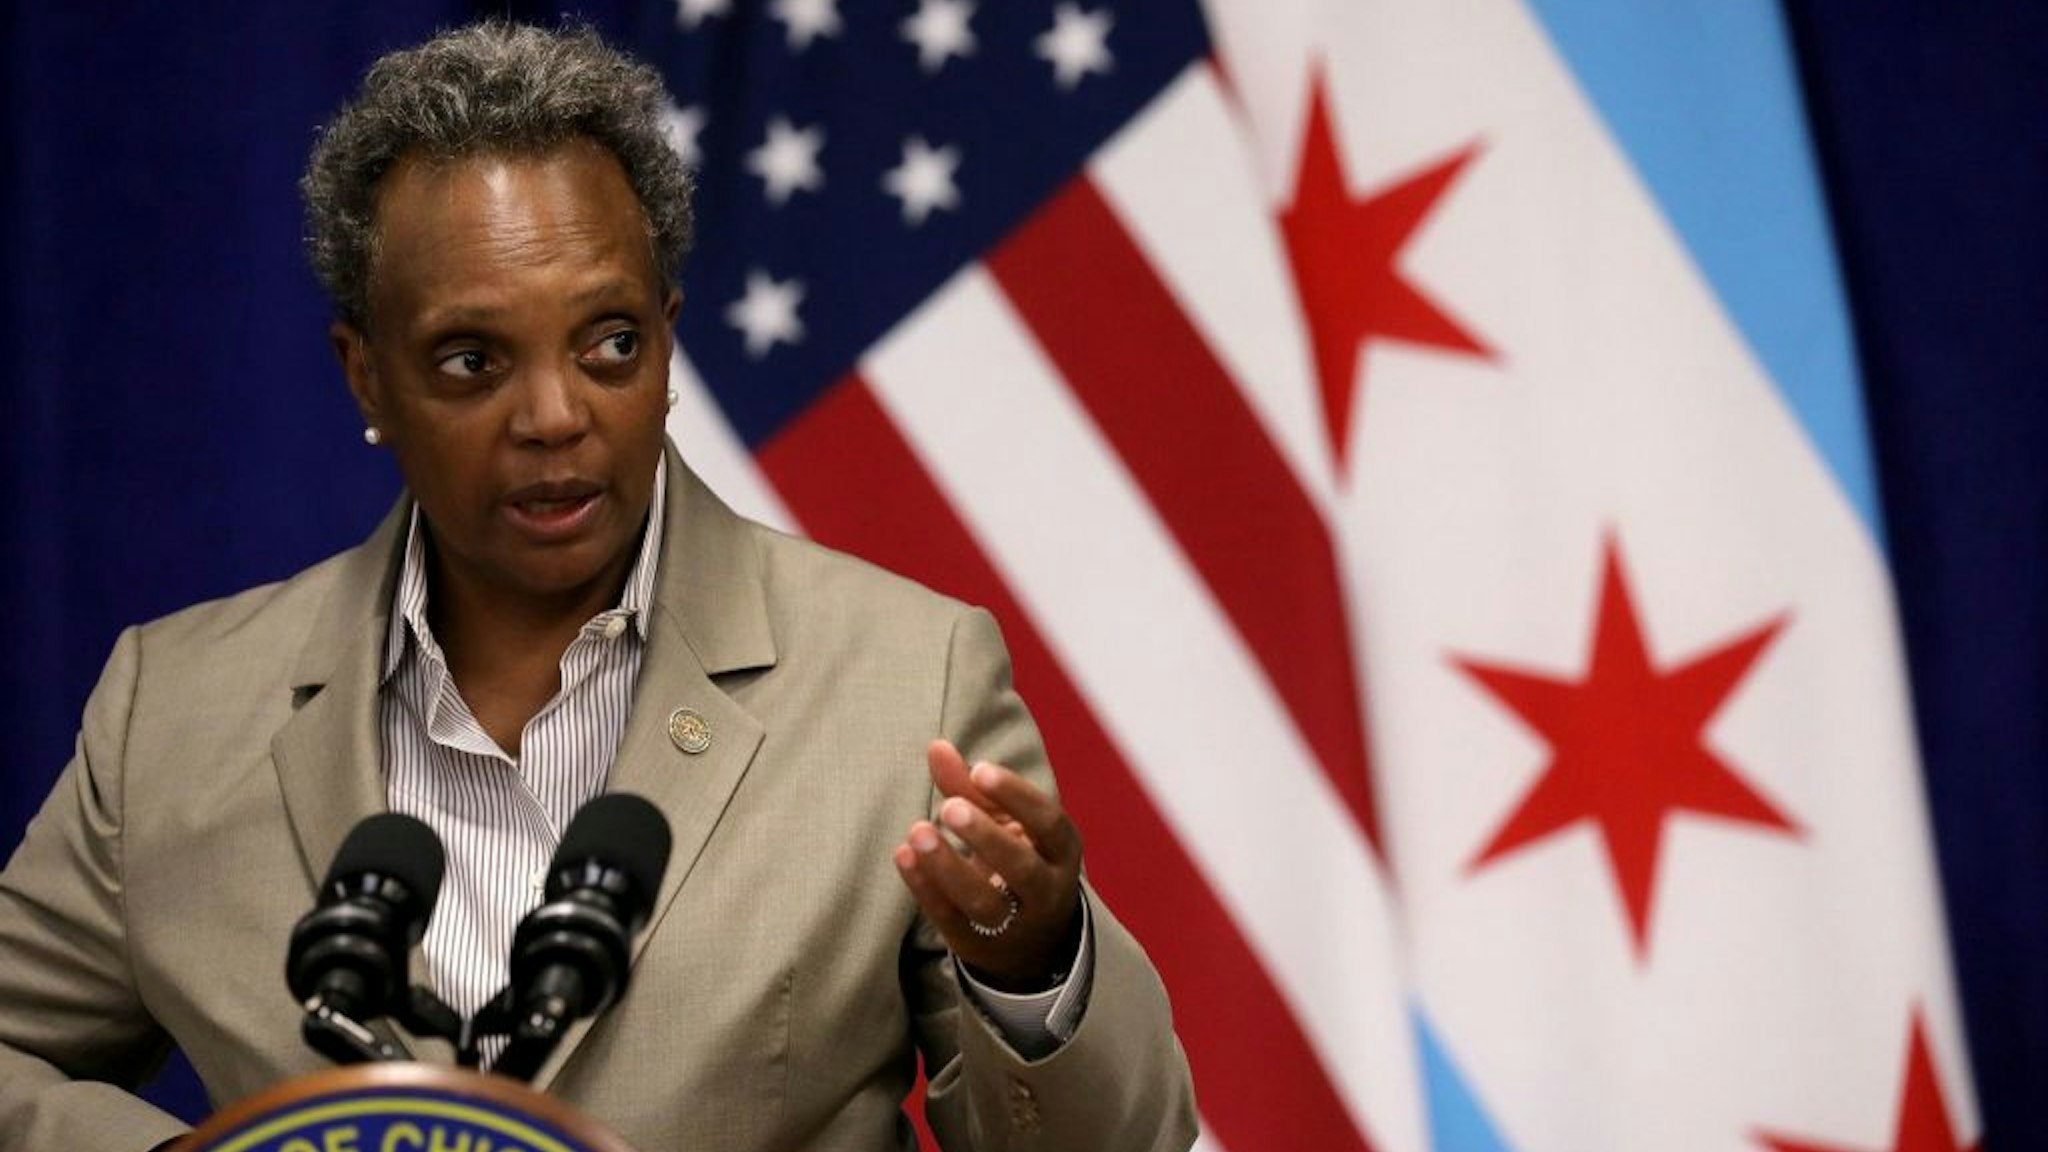 Mayor Lori Lightfoot speaks during a news conference at the Greater Western Community Development Project in Chicago on Monday, Sept. 14, 2020. (Antonio Perez/Chicago Tribune/Tribune News Service via Getty Images)